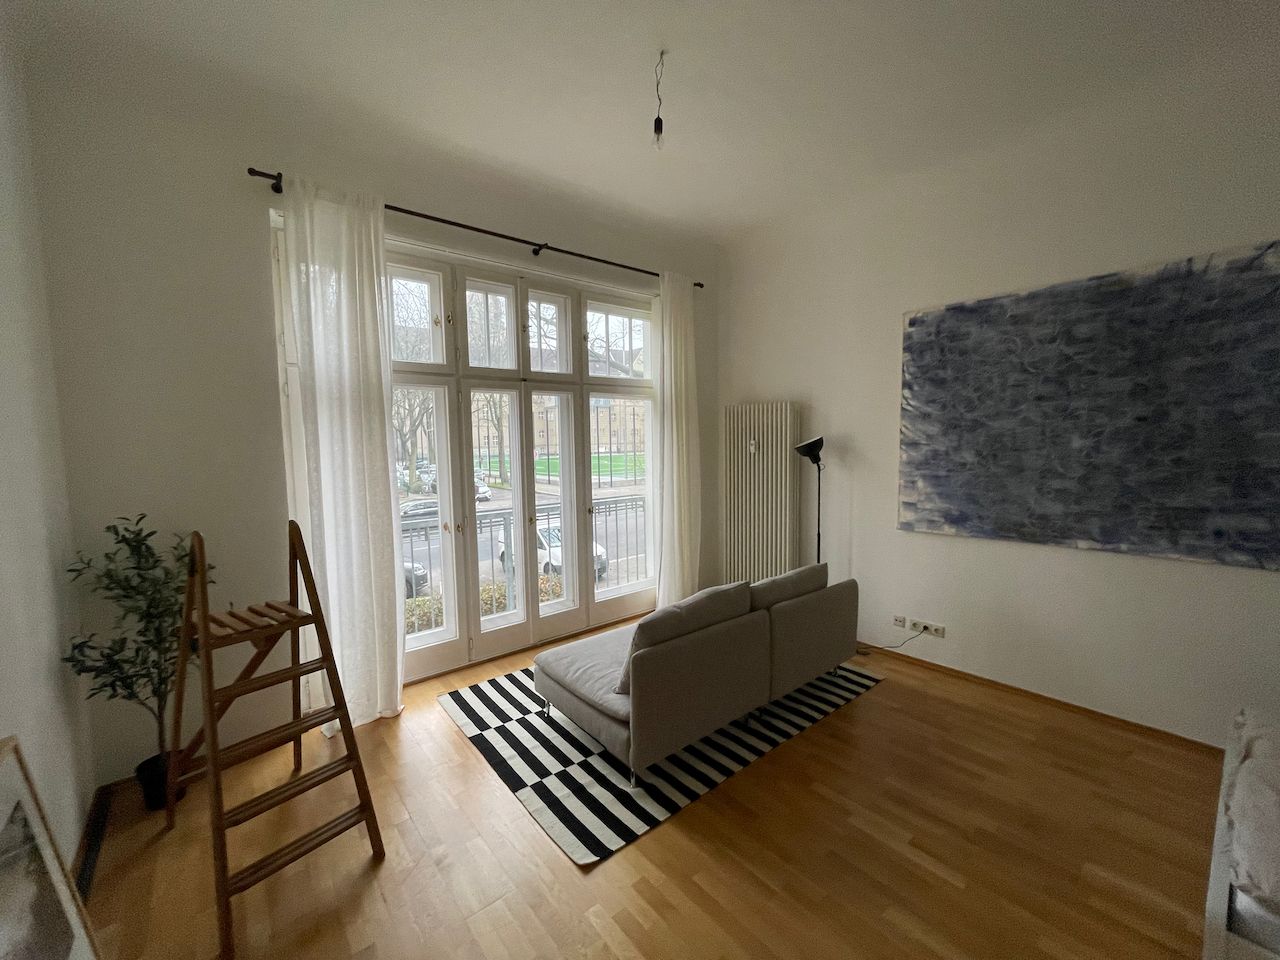 Sunny 1-bedroom apartment/studio with high ceilings and French balcony in Friedenau